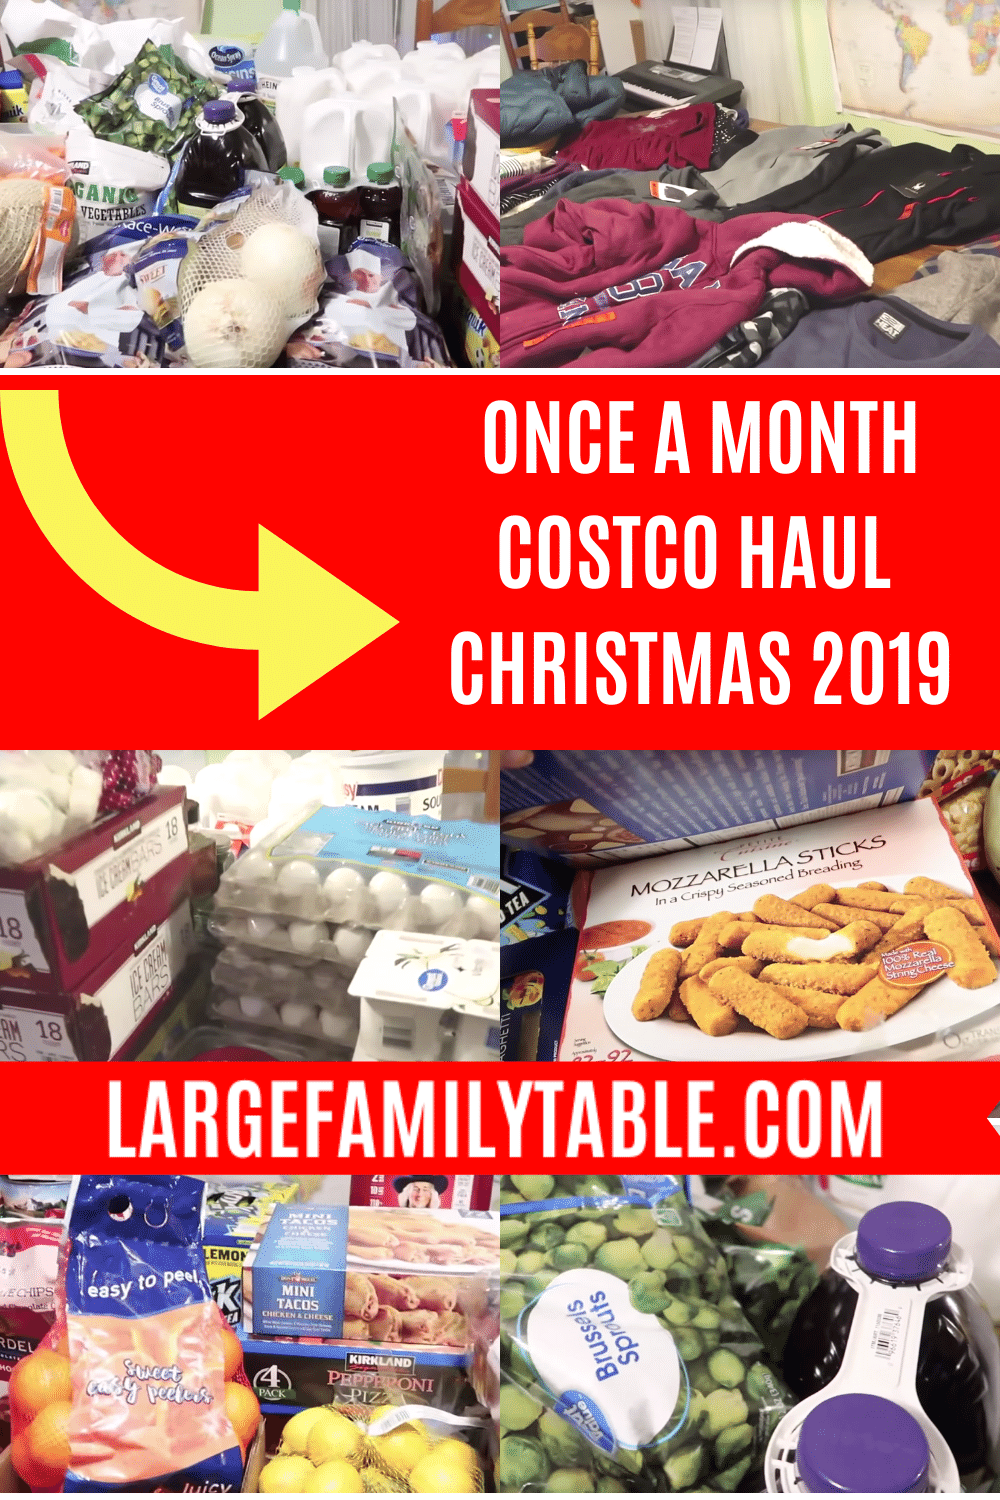 COSTCOCHRISTMAS2019 Large Family Table